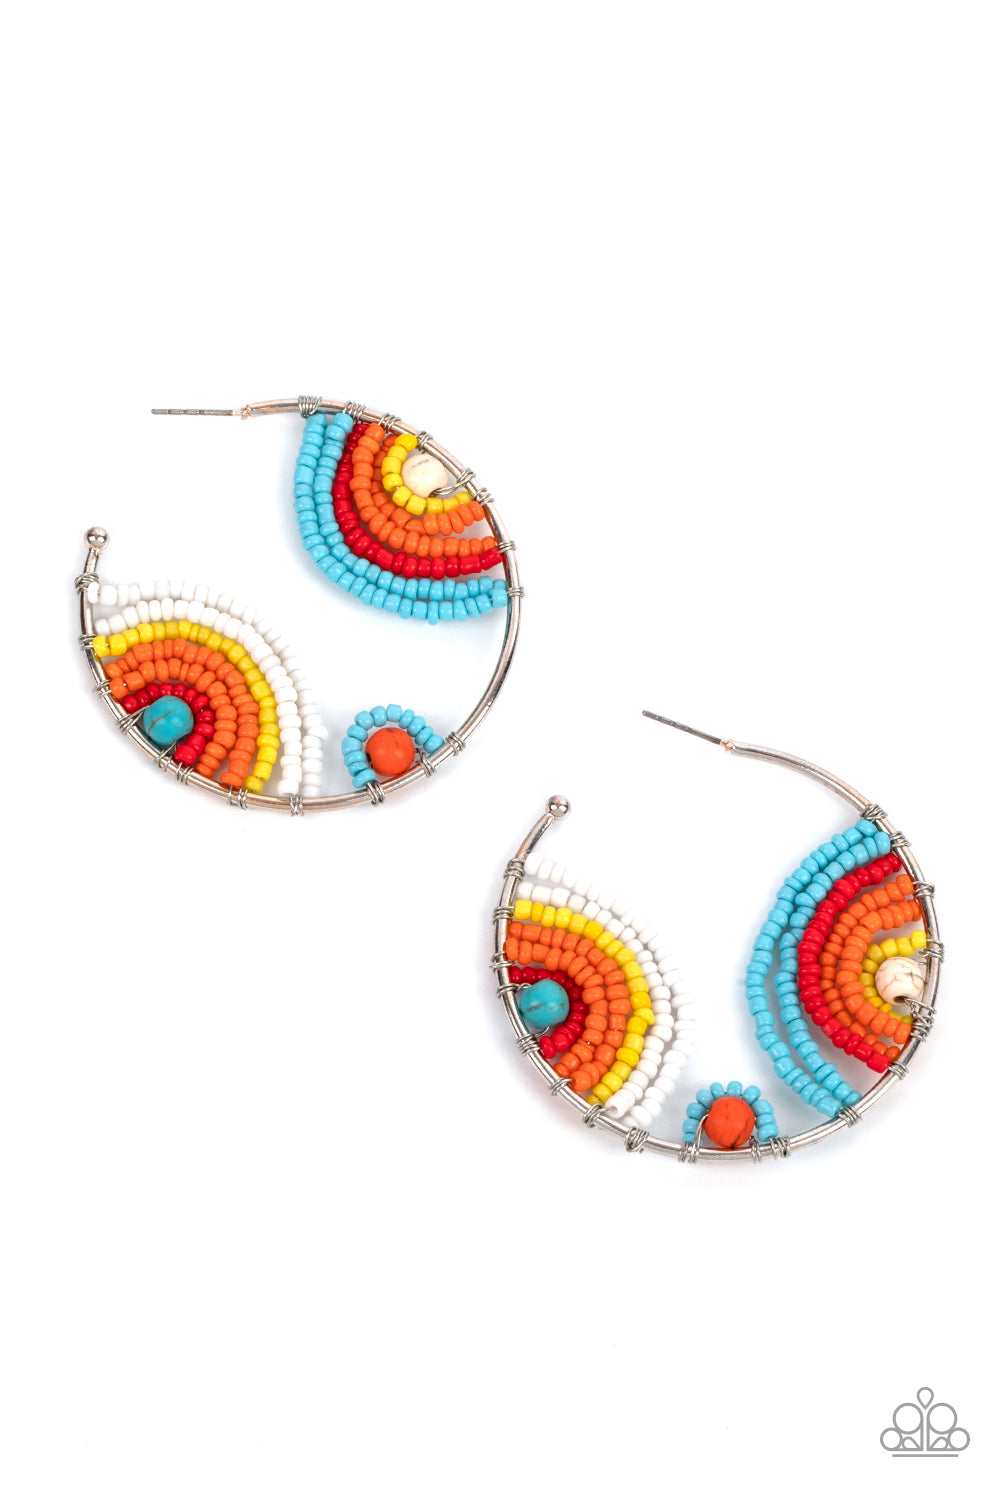 Rainbow Horizons Multi Earring - Paparazzi Accessories  Rows of turquoise, red, orange, yellow, and white seed beads curl around turquoise, orange, and white stone centers, creating colorful rainbows inside a delicate wire wrapped hoop. Hoop measures approximately 2" in diameter. Earring attaches to a standard post fitting.  All Paparazzi Accessories are lead free and nickel free!  Sold as one pair of hoop earrings.